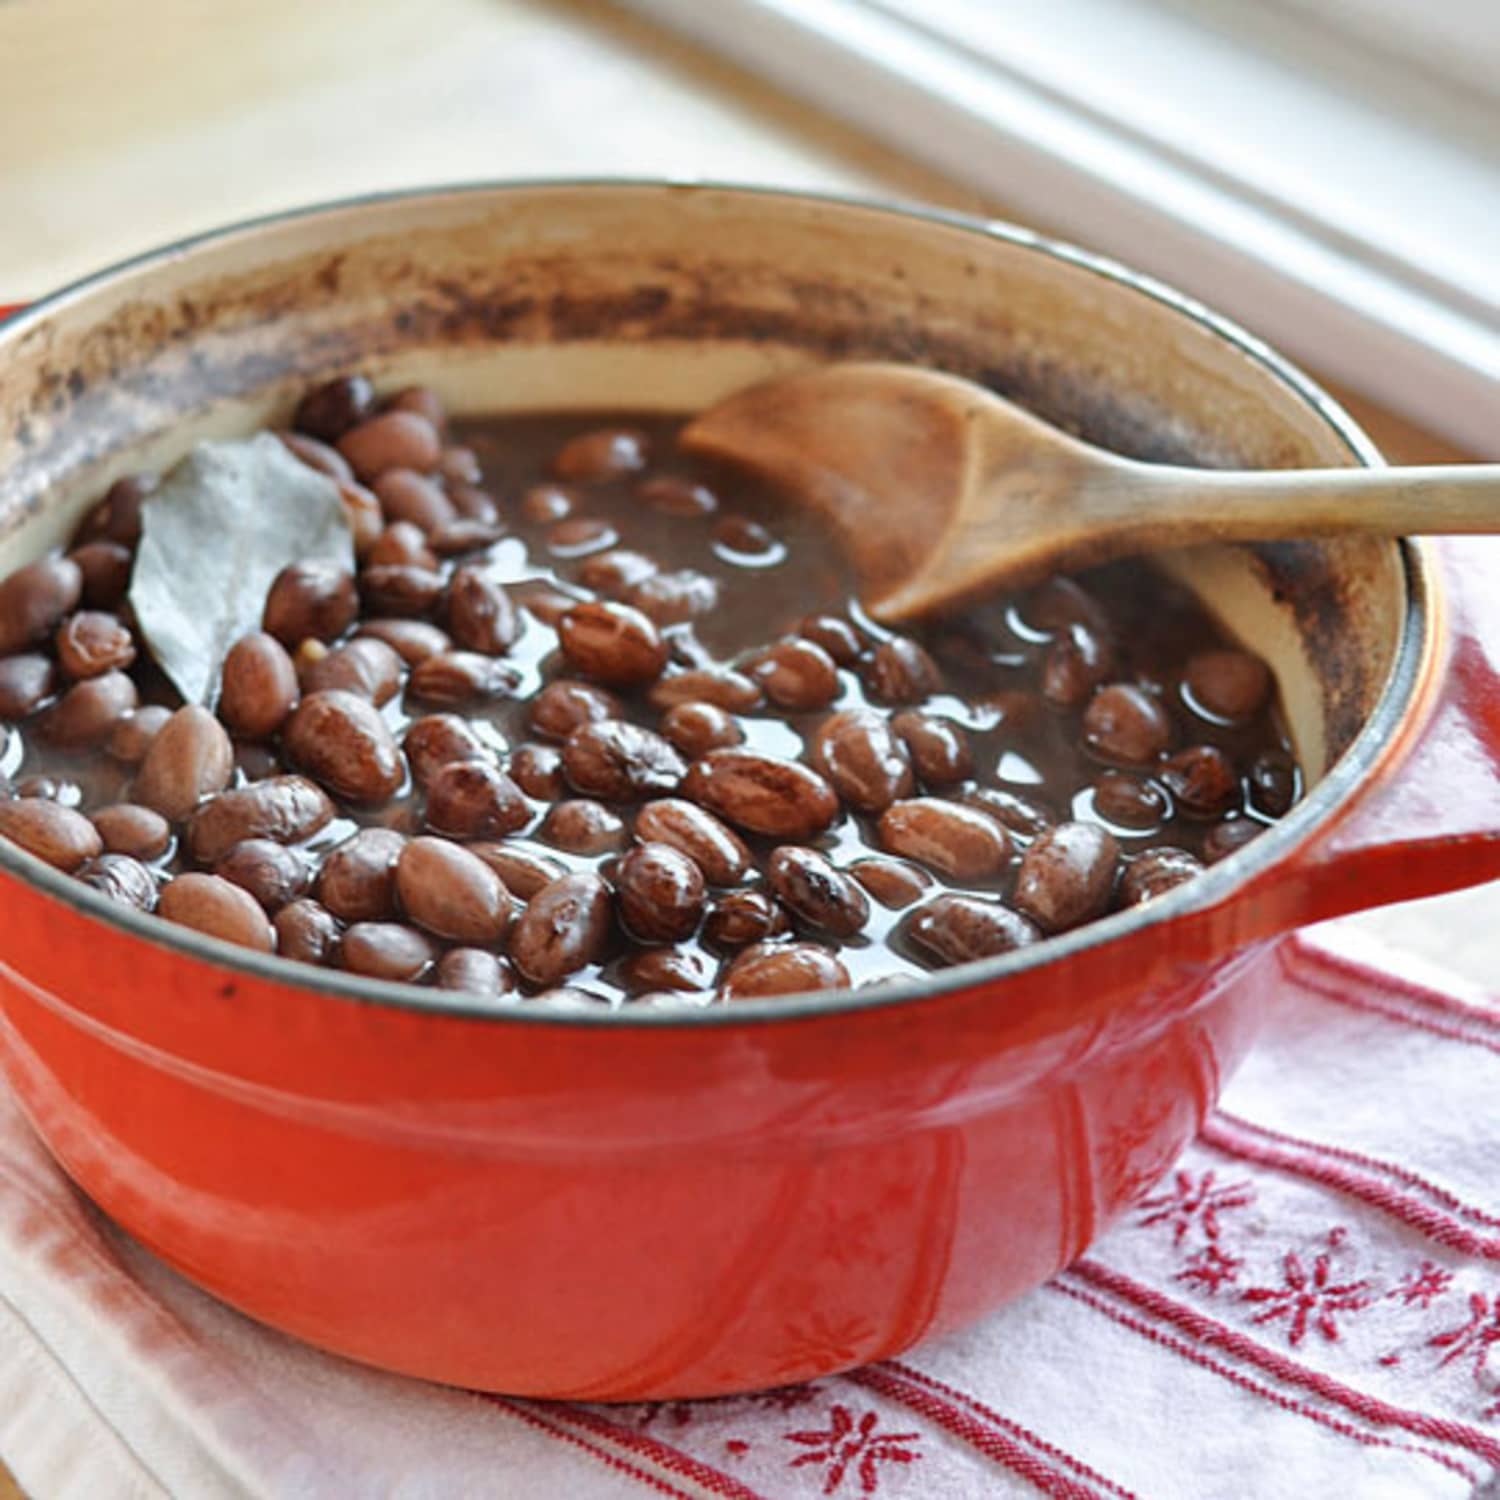 How to Cook Beans on the Stove